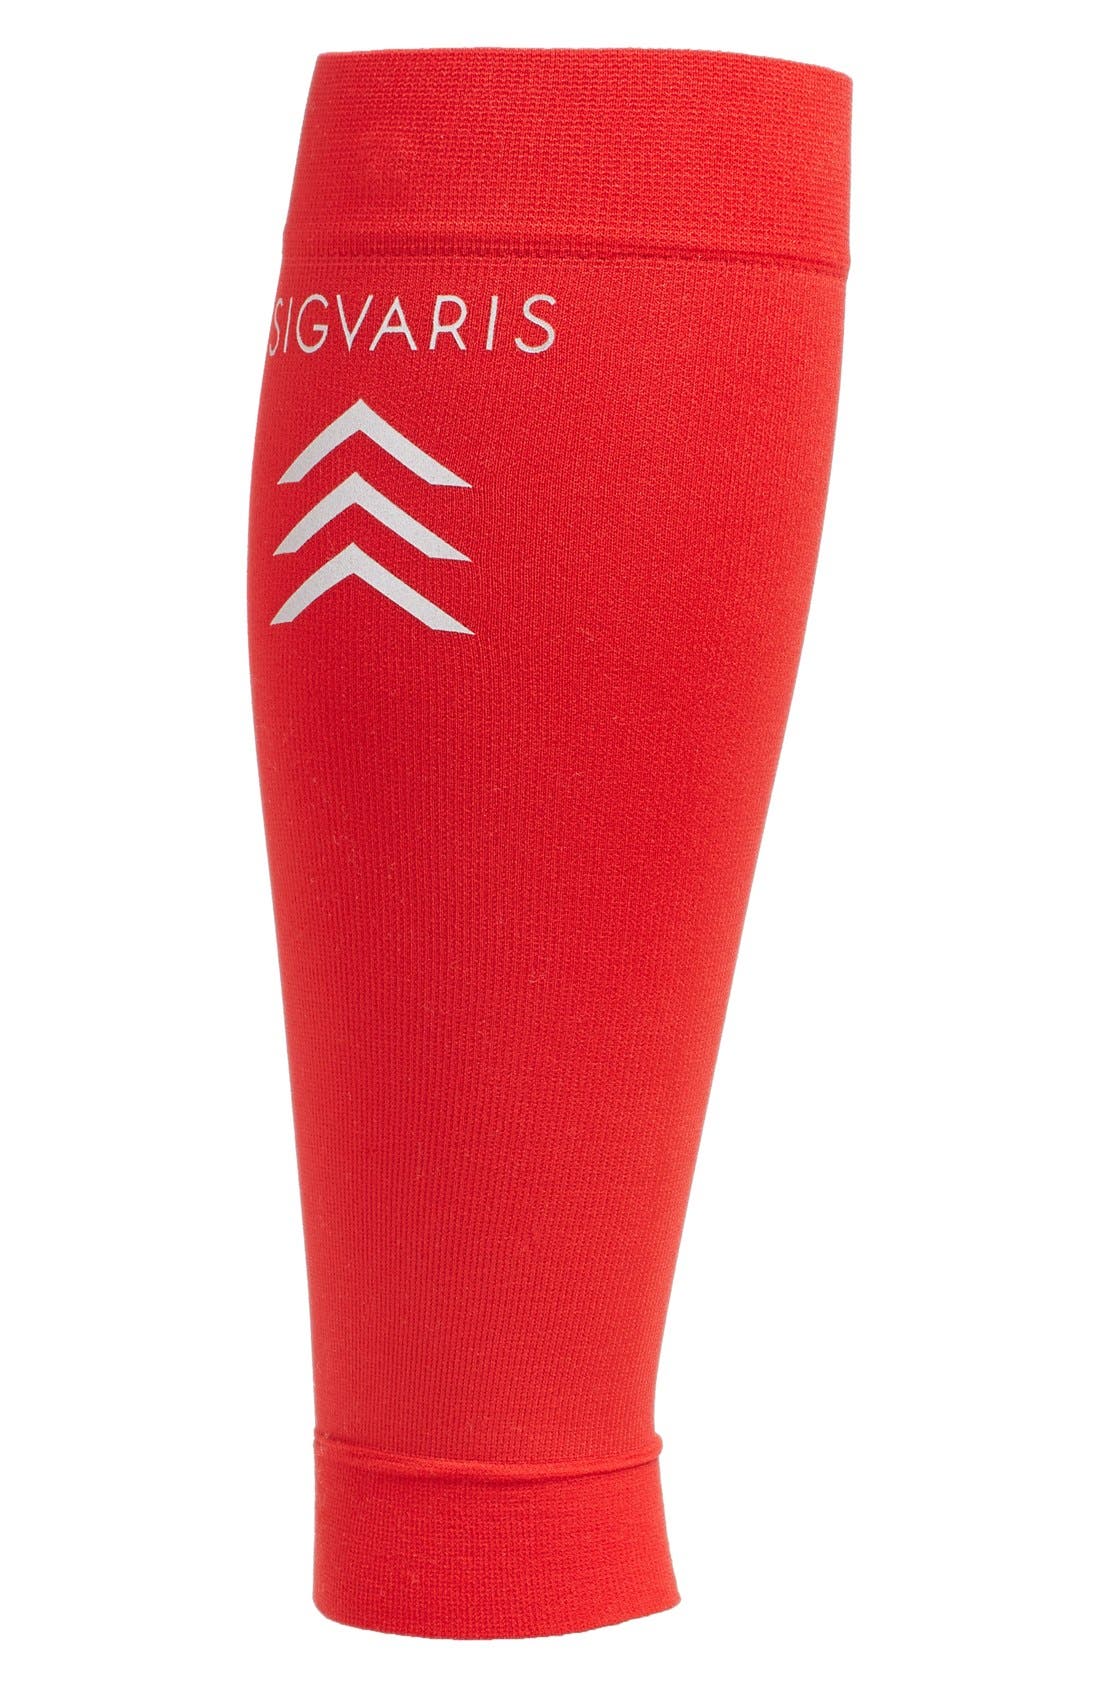 UPC 745129219895 product image for Men's Insignia By Sigvaris 'Sports' Graduated Compression Performance Calf Sleev | upcitemdb.com